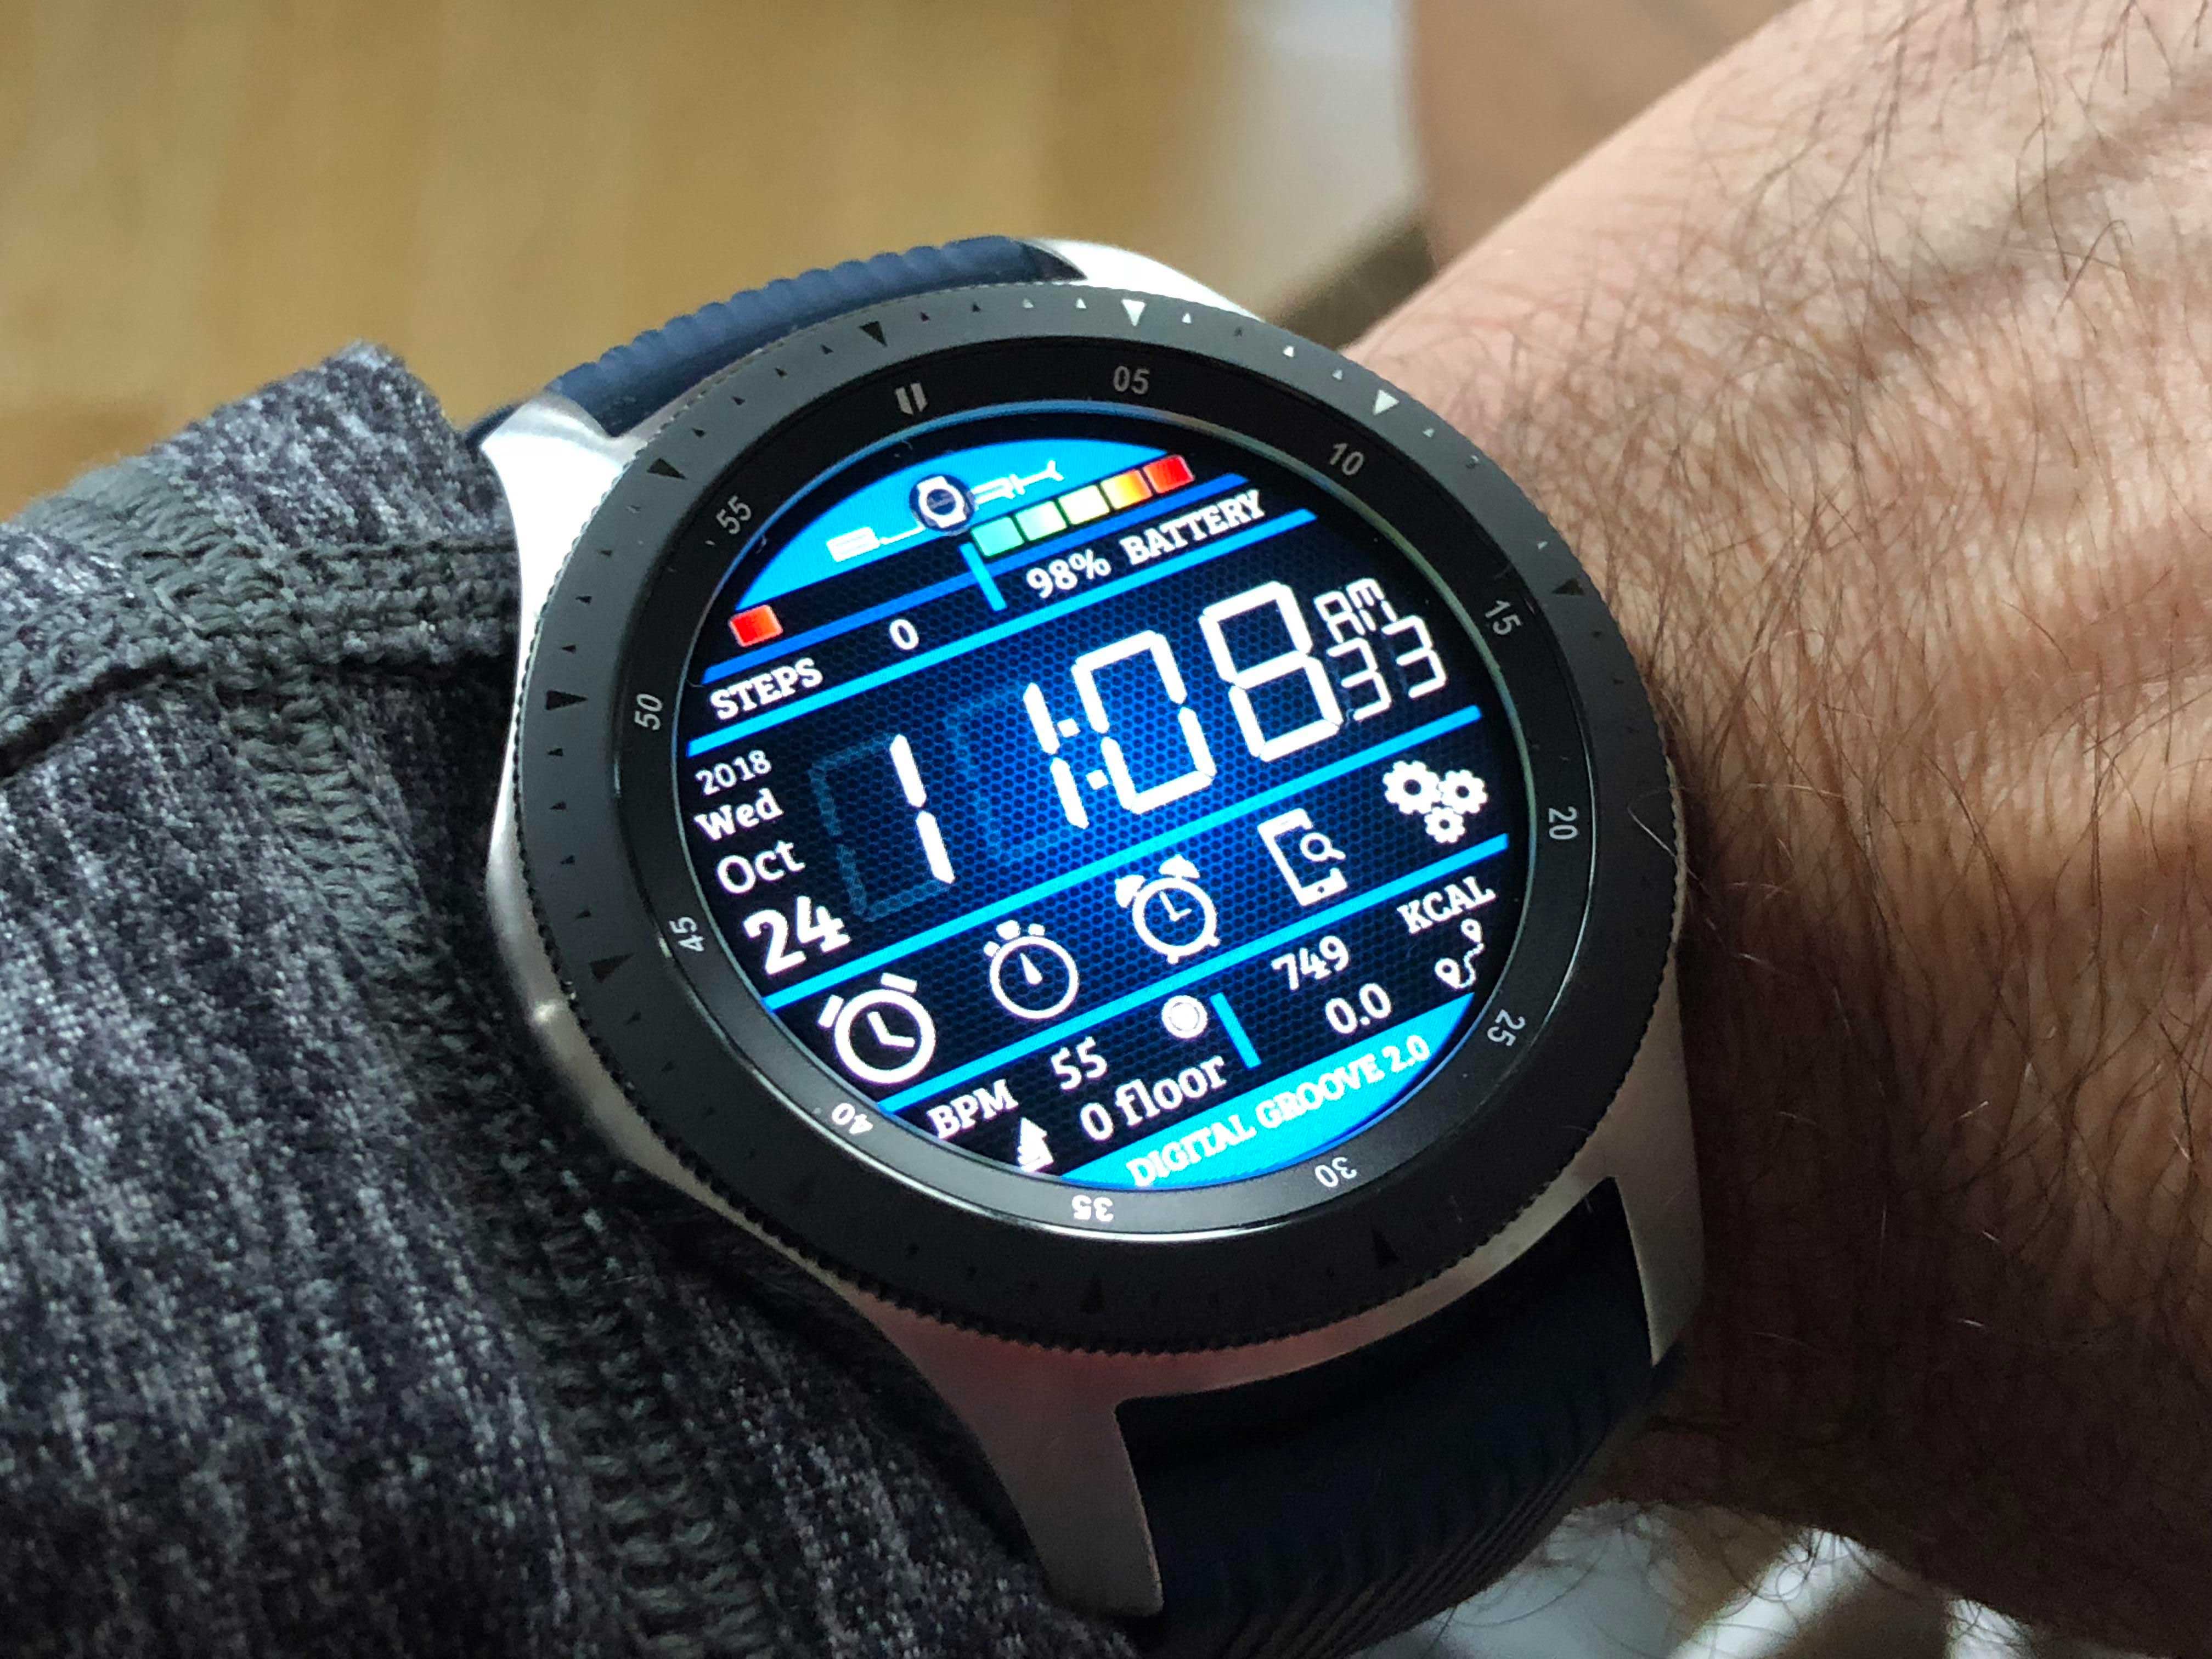 Top 6 Best Smartwatches for Android Phones